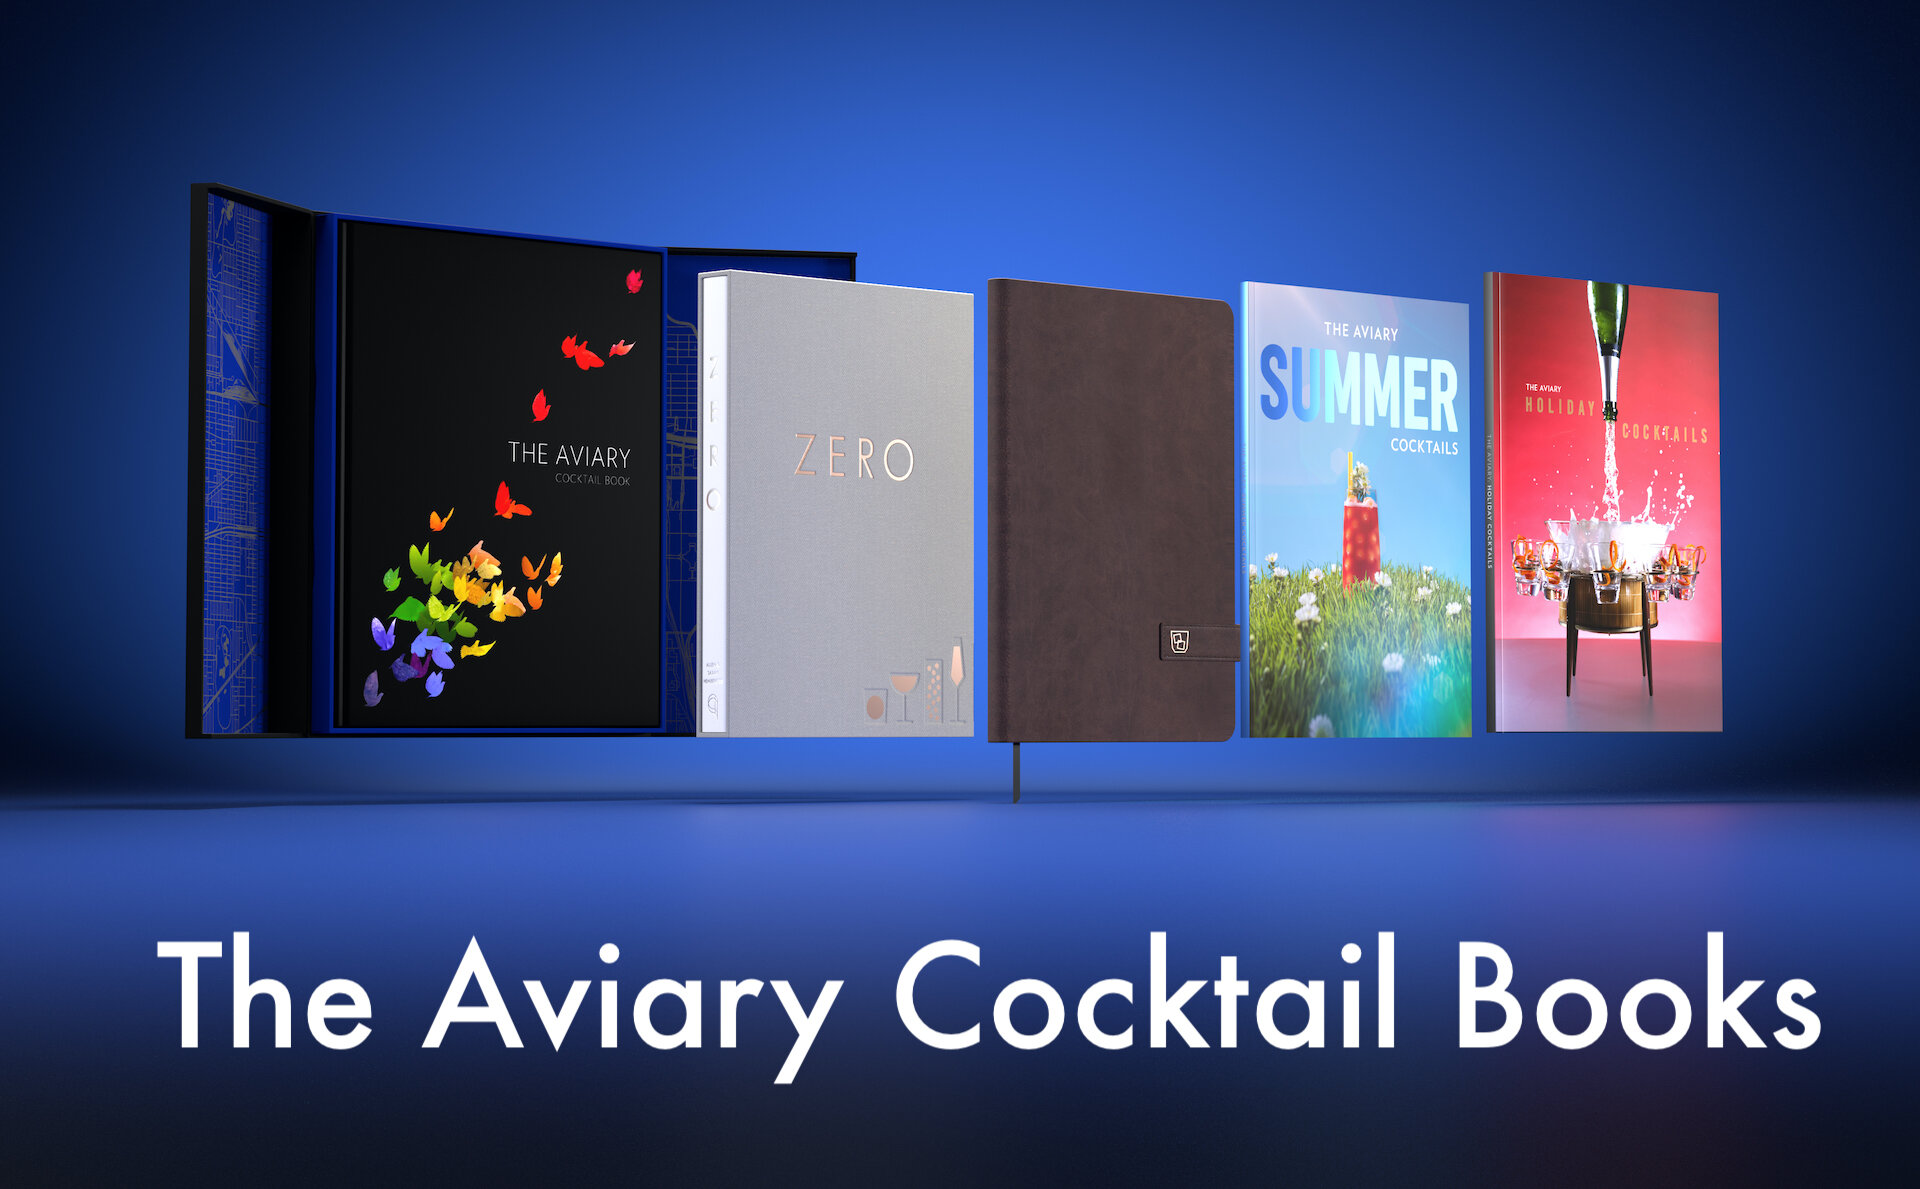 The Aviary Cocktail Books